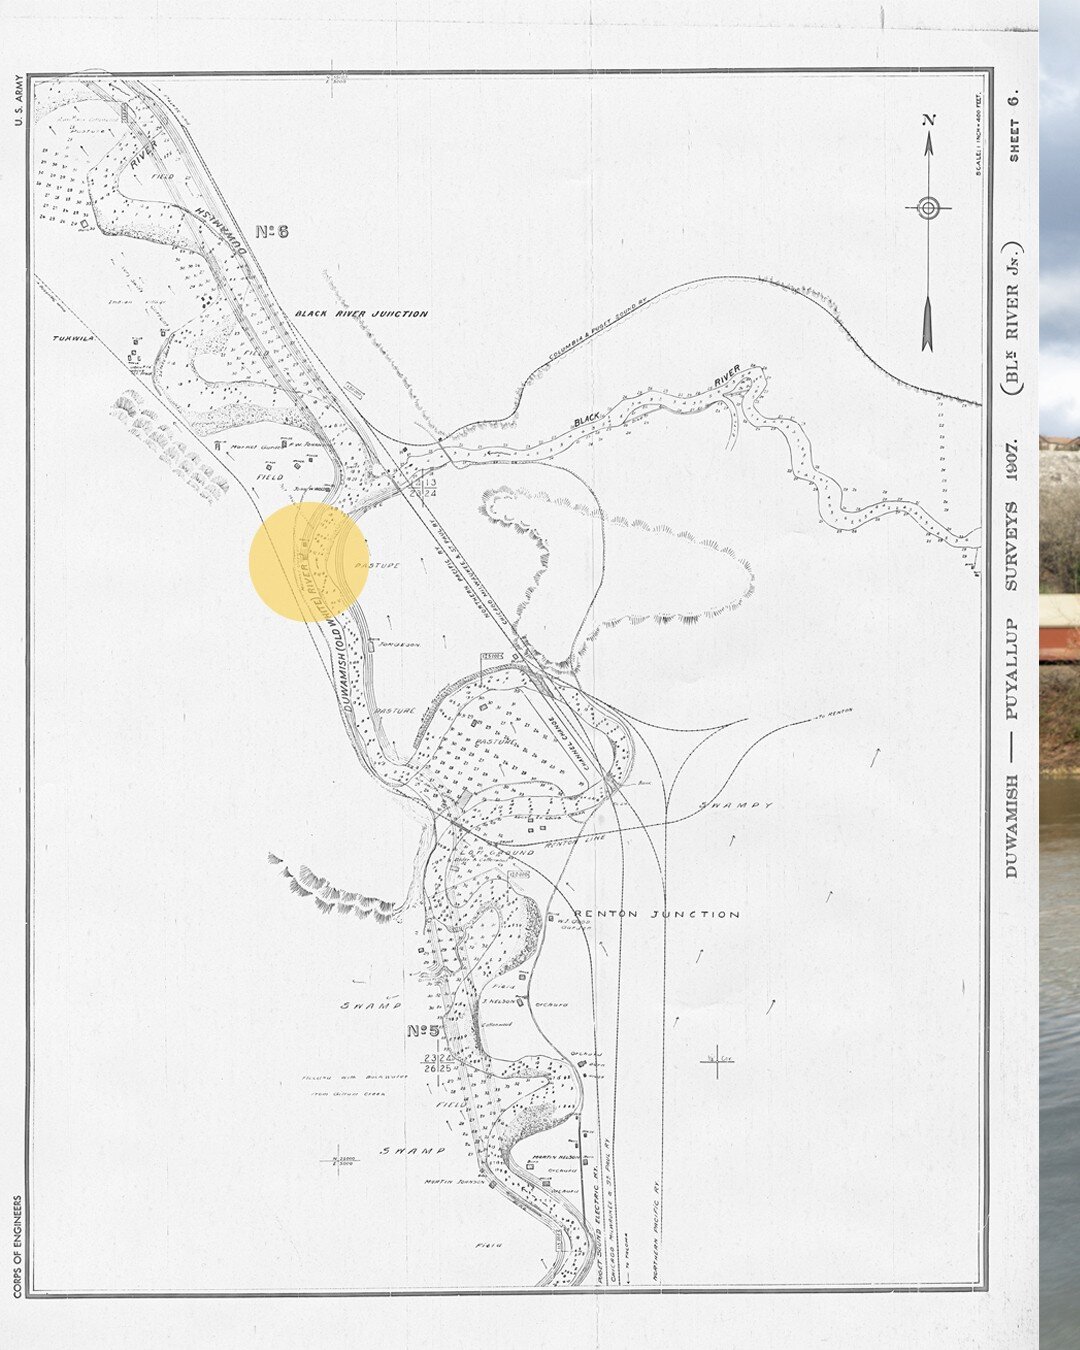 This place has at least two translated names: Confluence of Waters / Meeting of Rivers. Prior to 1916, the now extinct Black River fed a 1,120 square mile watershed to the Duwamish at this confluence. Today it pulls 25 square miles of drainage and ru